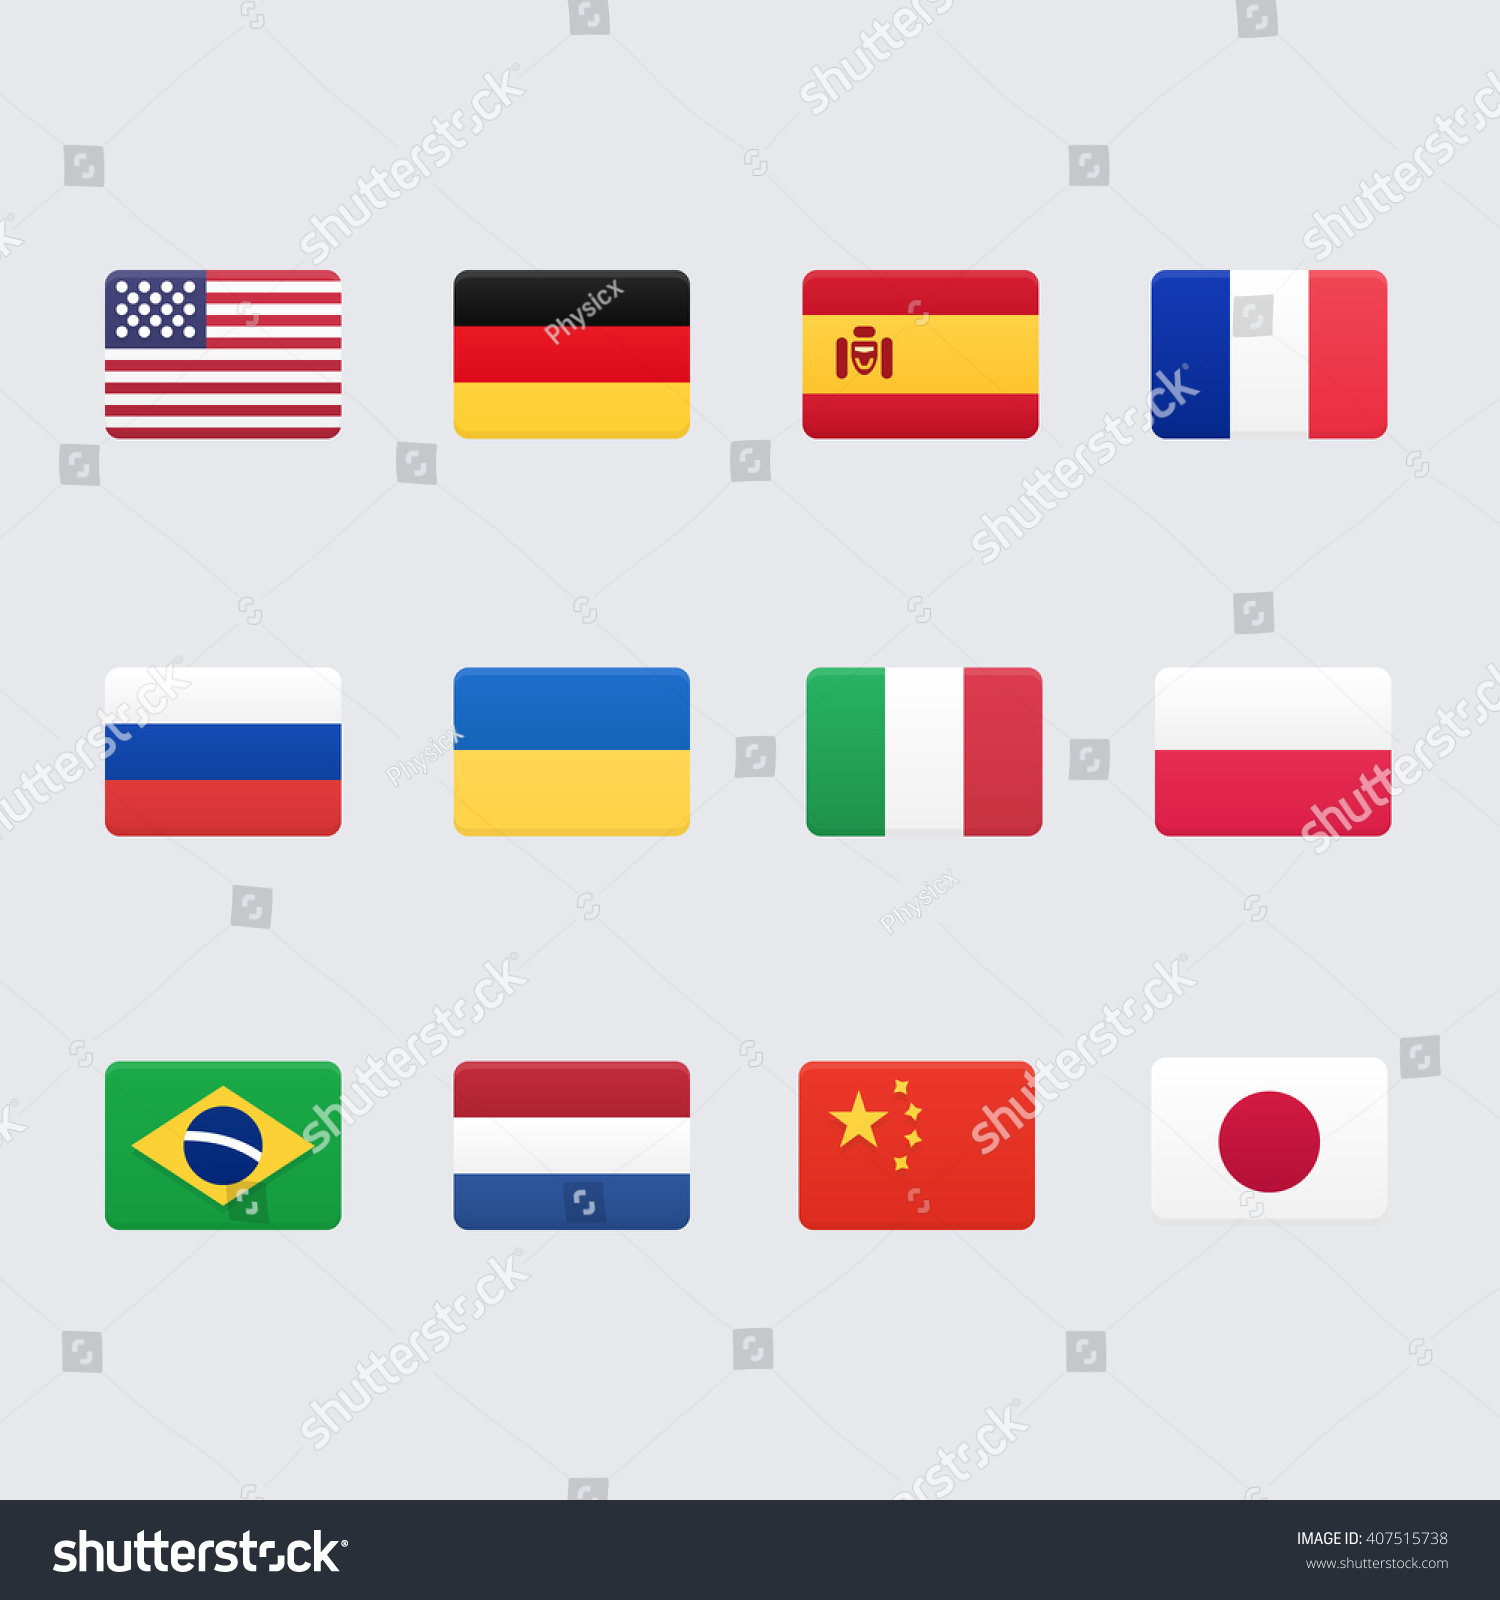 Country Flags Icons. Vector Illustration - 407515738 : Shutterstock